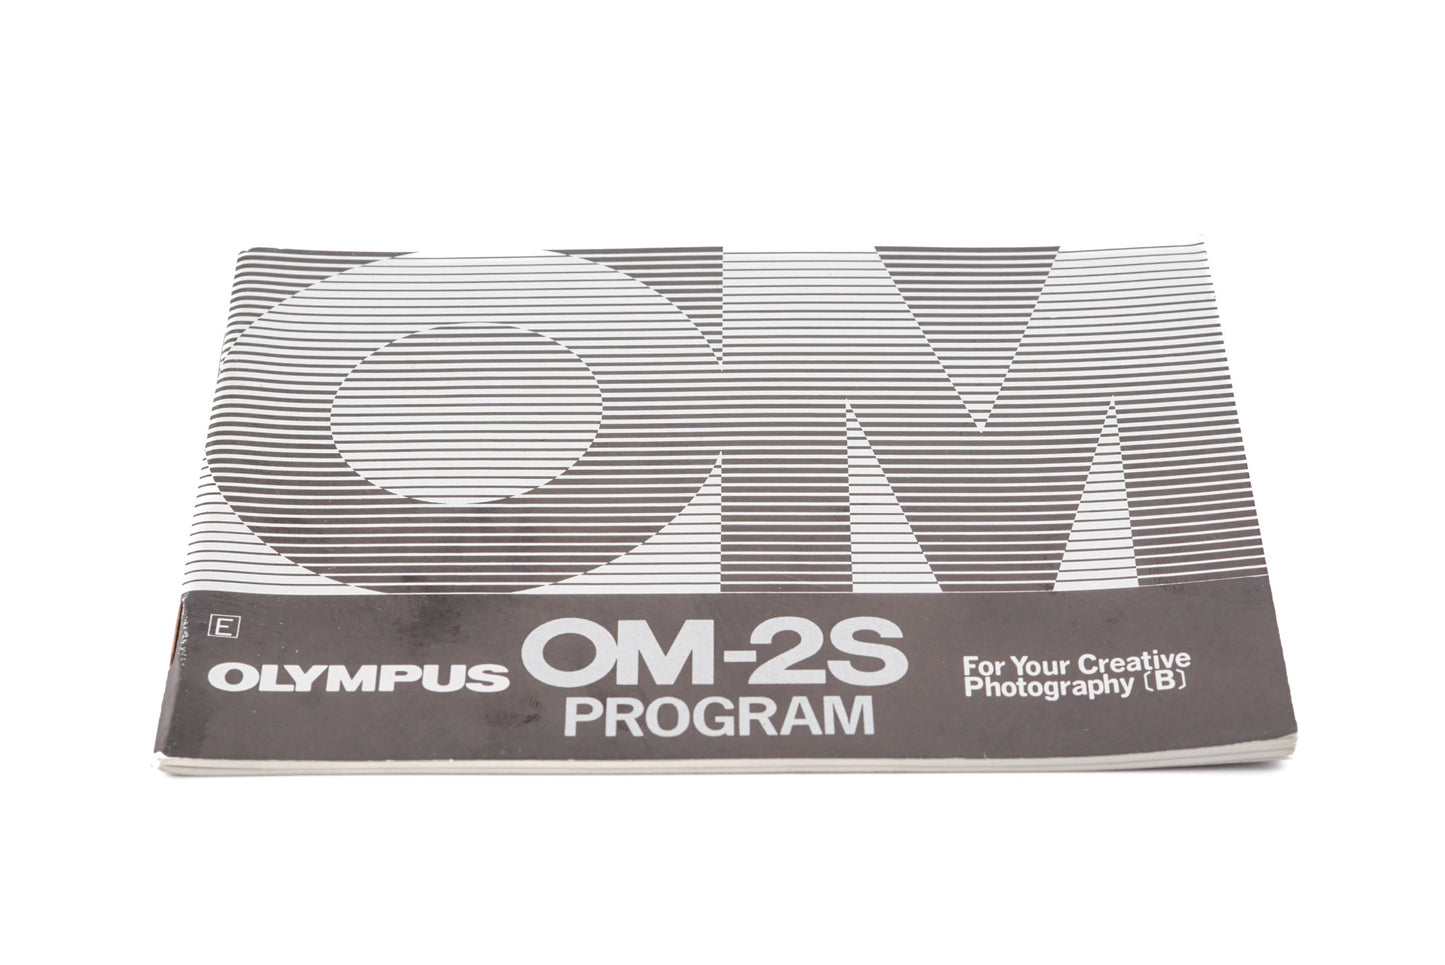 Olympus OM-2 Spot/Program For Your Creative Photography Booklet